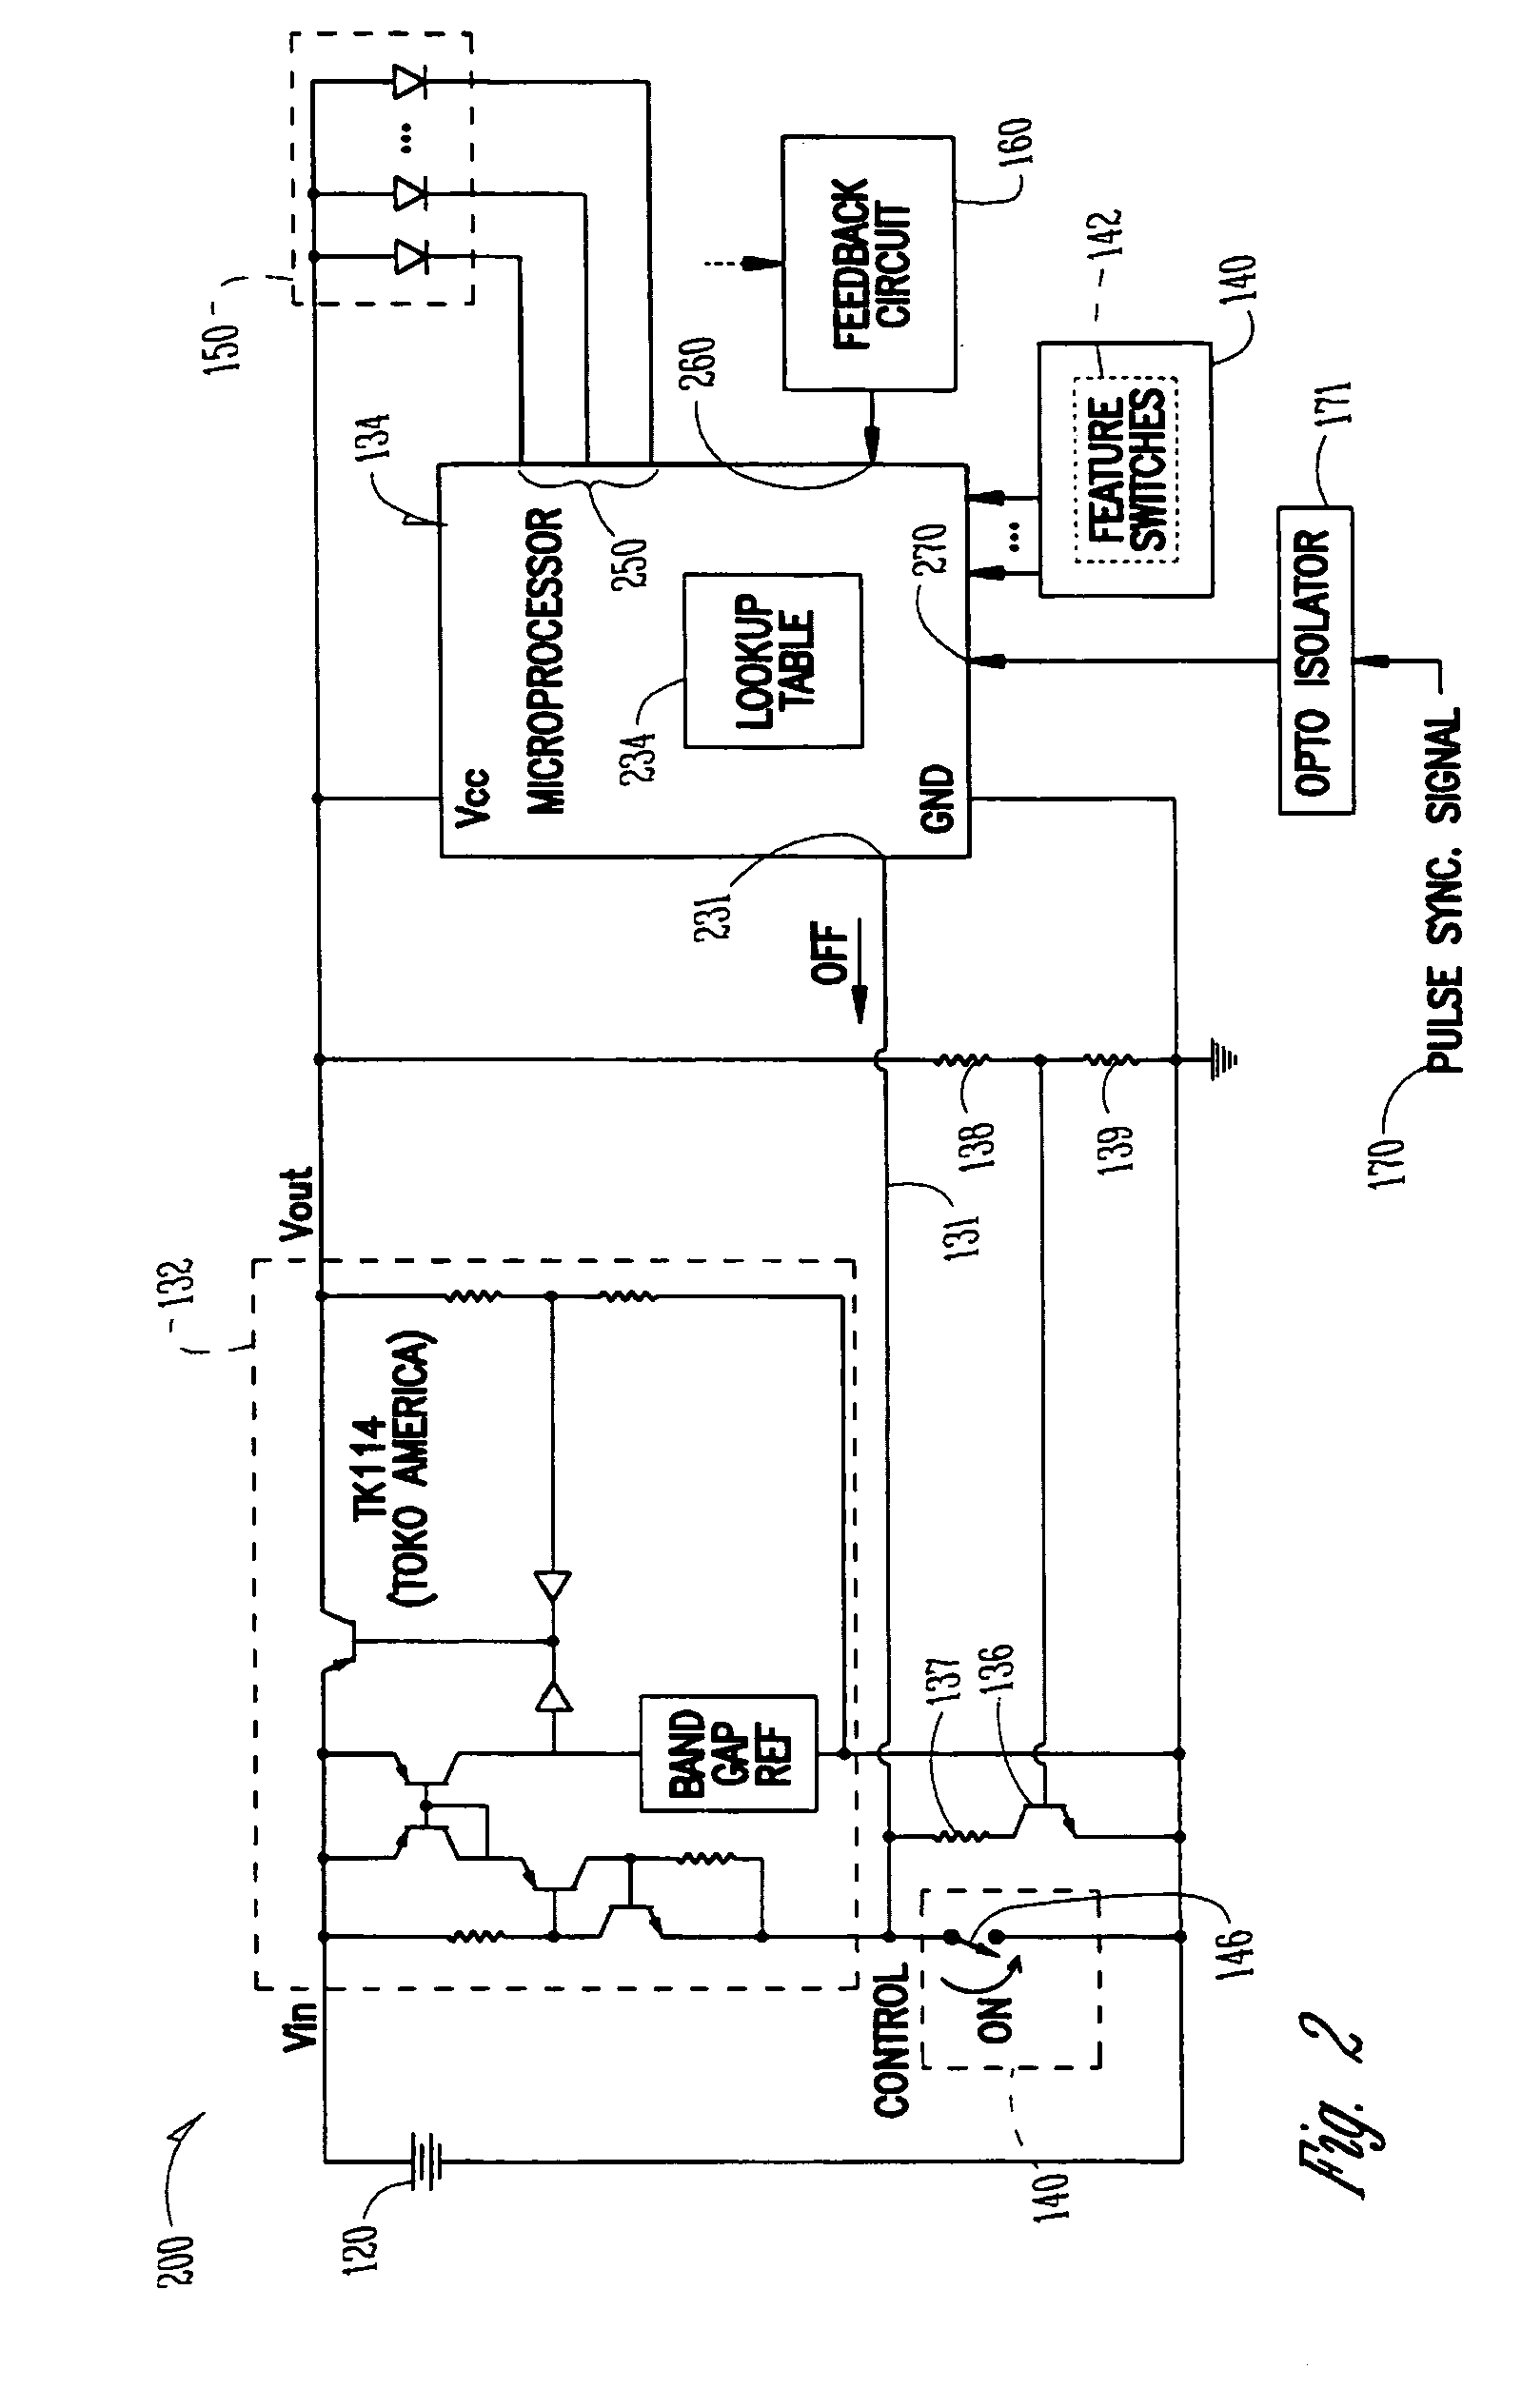 Method and apparatus for a variable intensity pulsed L.E.D. light